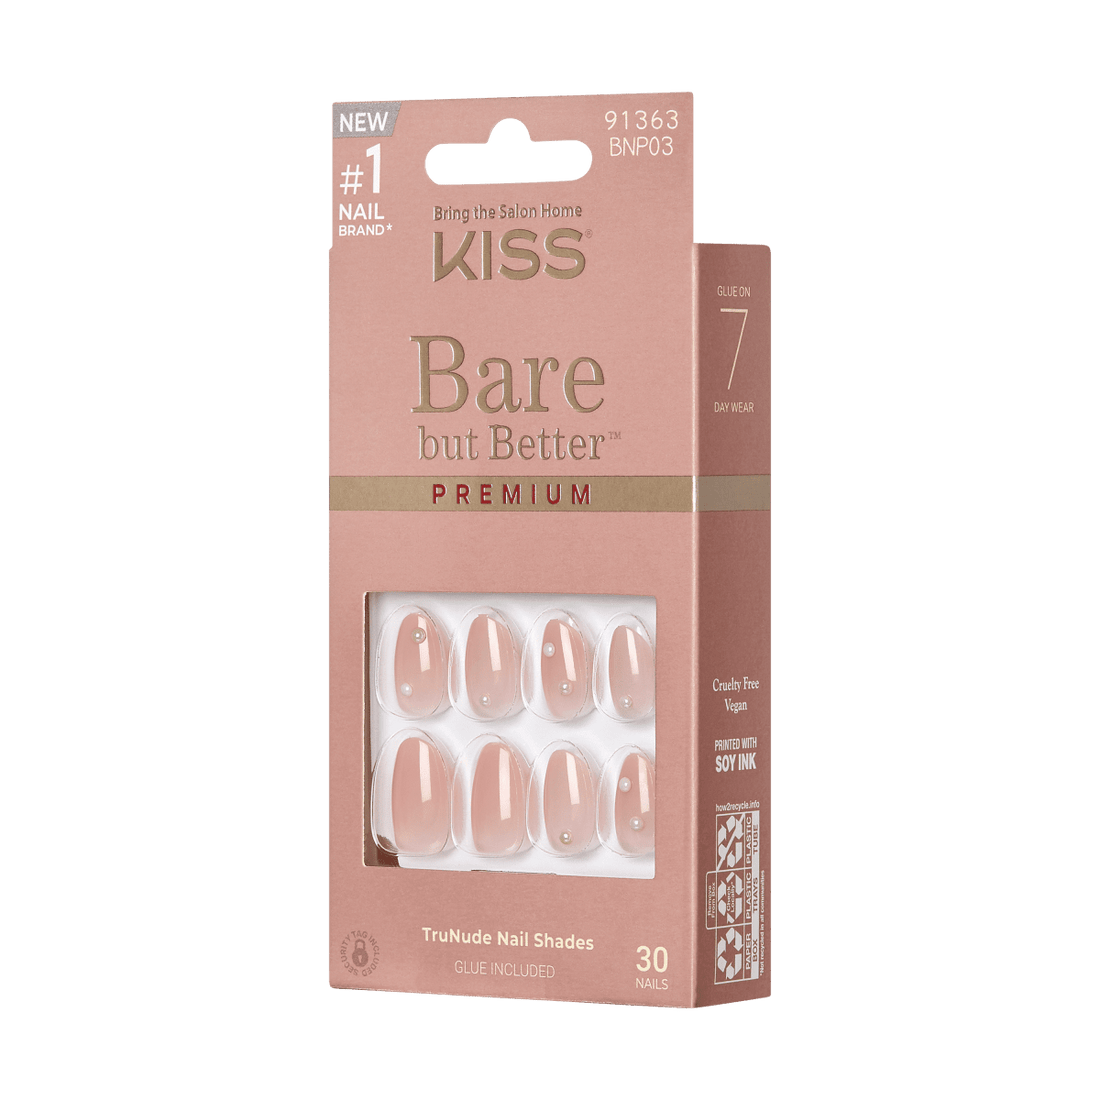 KISS Bare but Better Premium Press-On Nails, 'Chai', Nude Pink